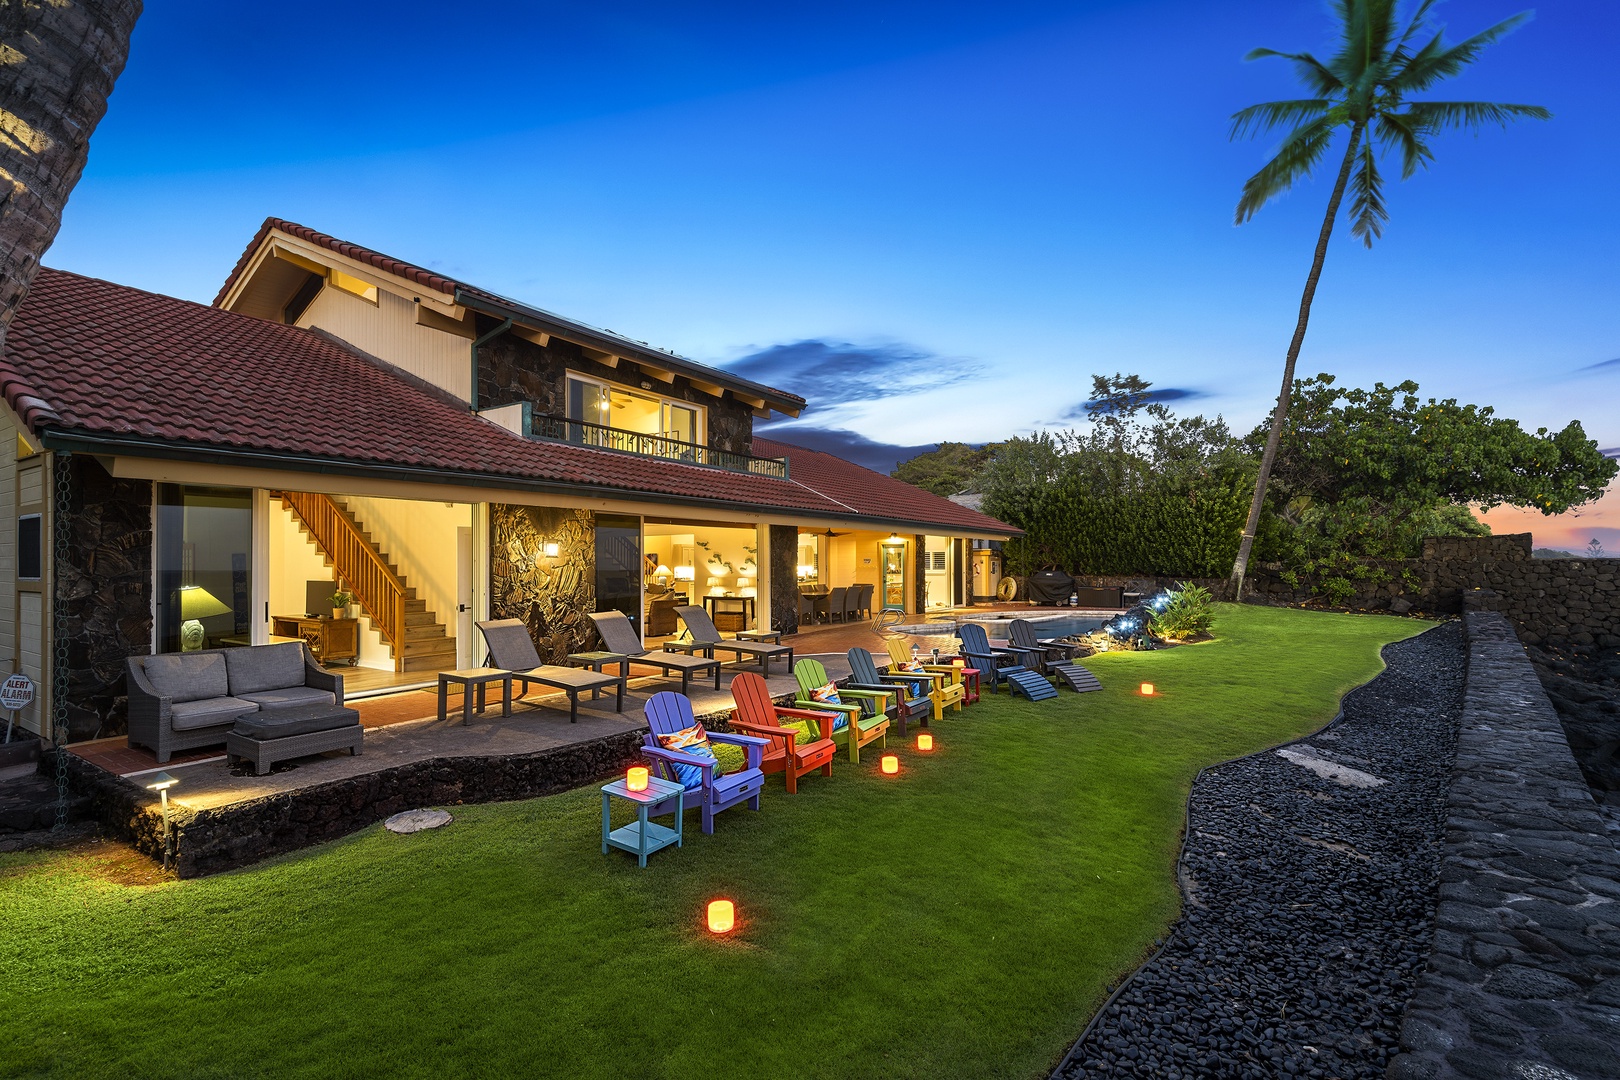 Kailua Kona Vacation Rentals, Hale Pua - Tranquil and serenity is what you'll find here!